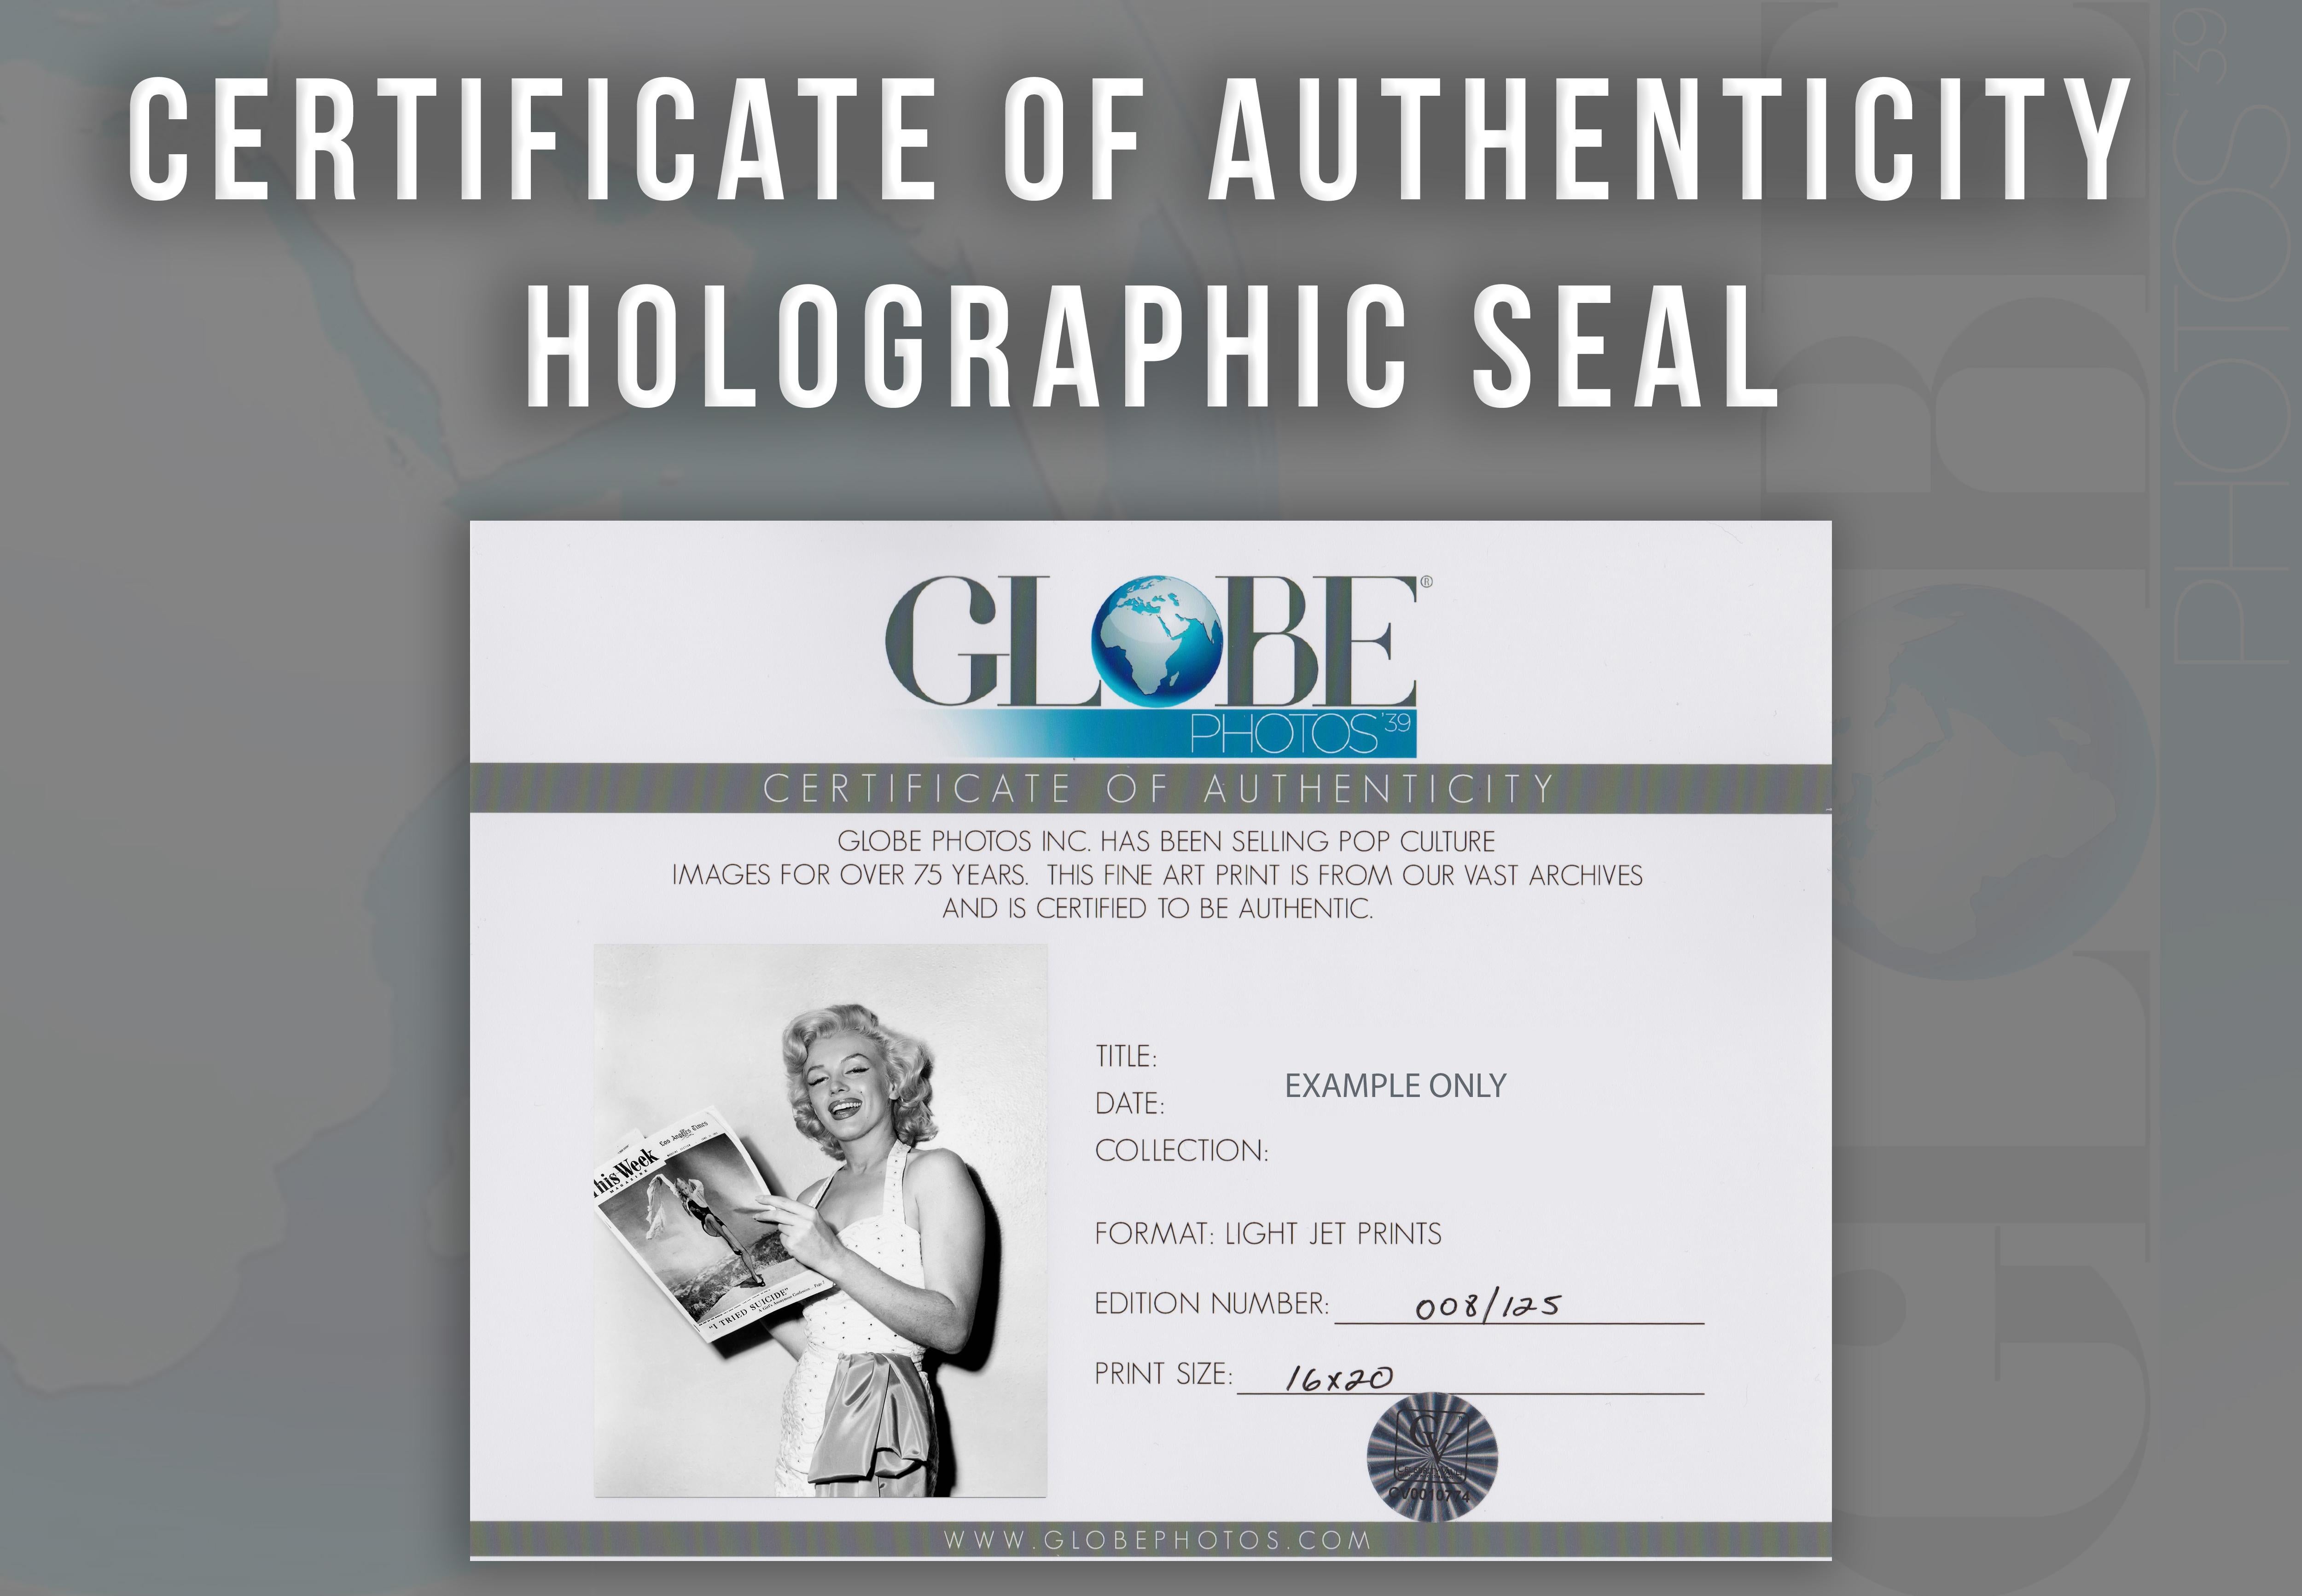 Marilyn Monroe Smling with Magazine Globe Photos Fine Art Print - Gray Portrait Photograph by Unknown